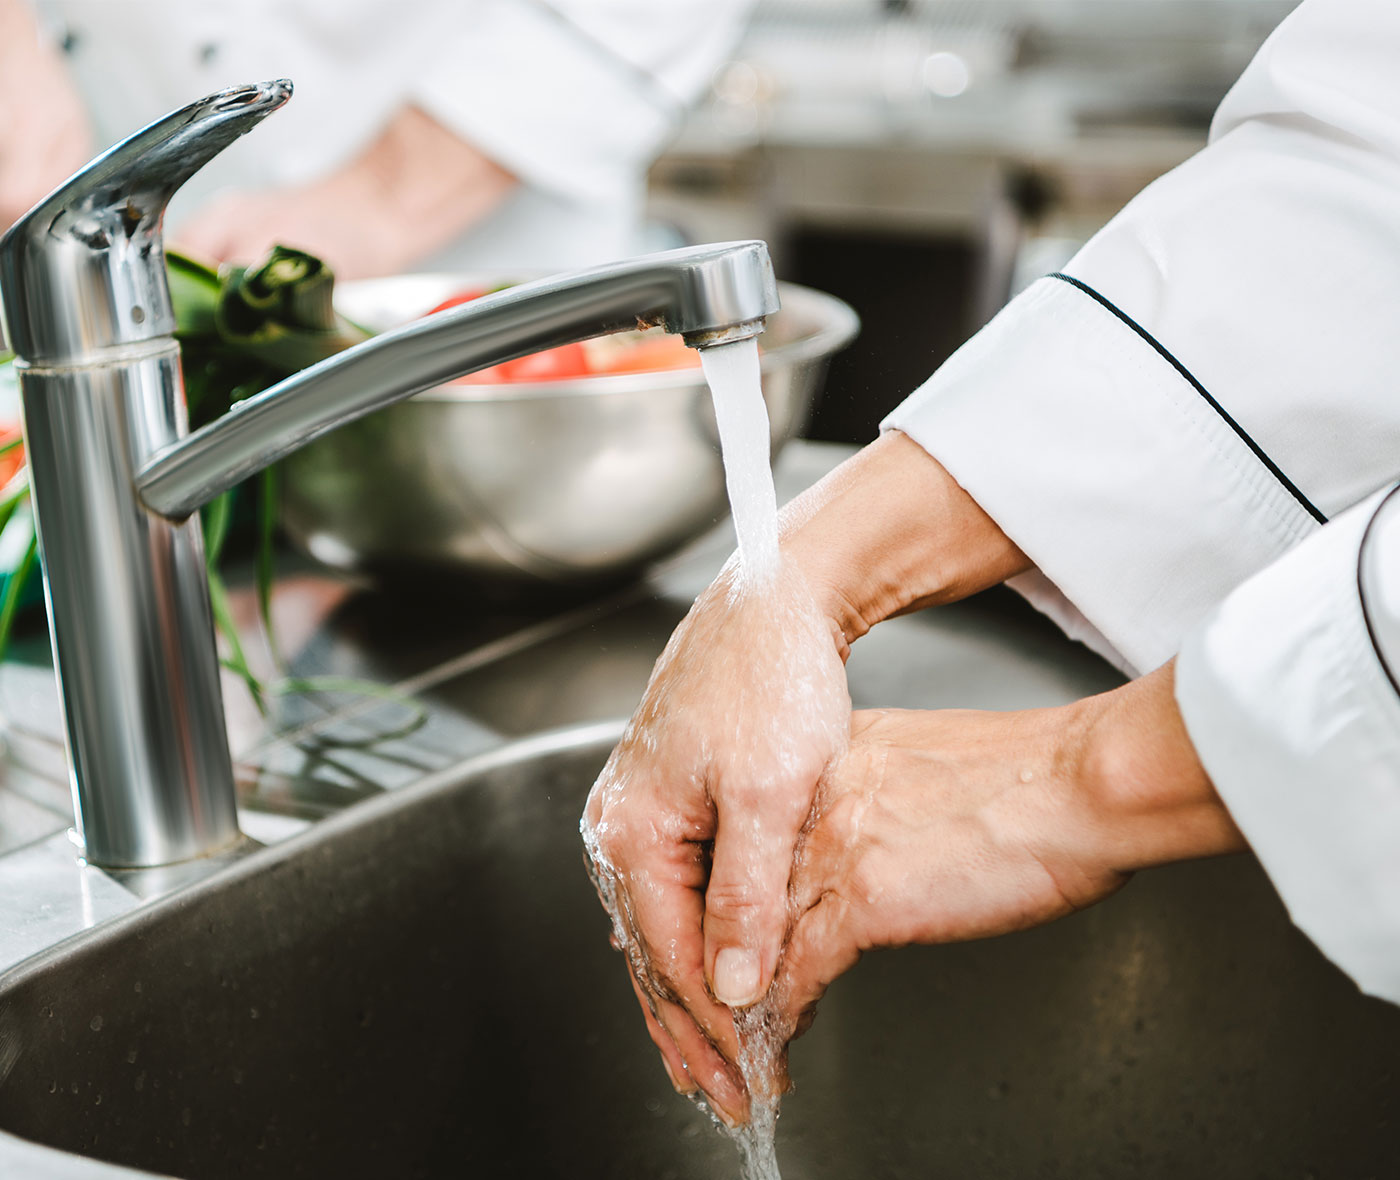 Chef washing hands in commercial kitchen while preparing food